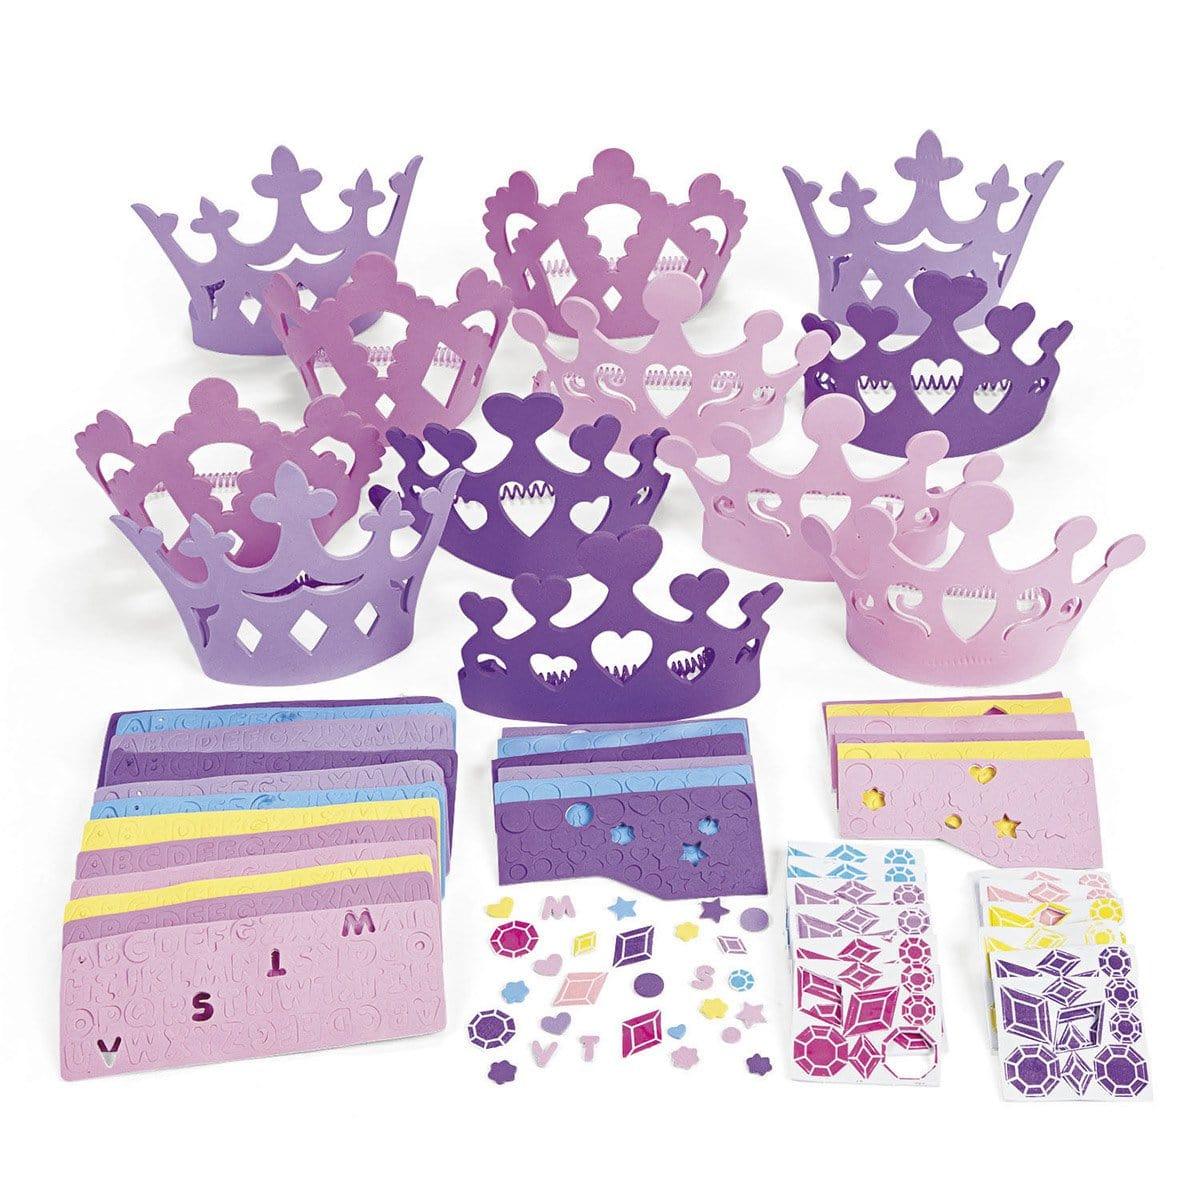 Buy Kids Birthday Customizable princess crown kit, 12 per package sold at Party Expert